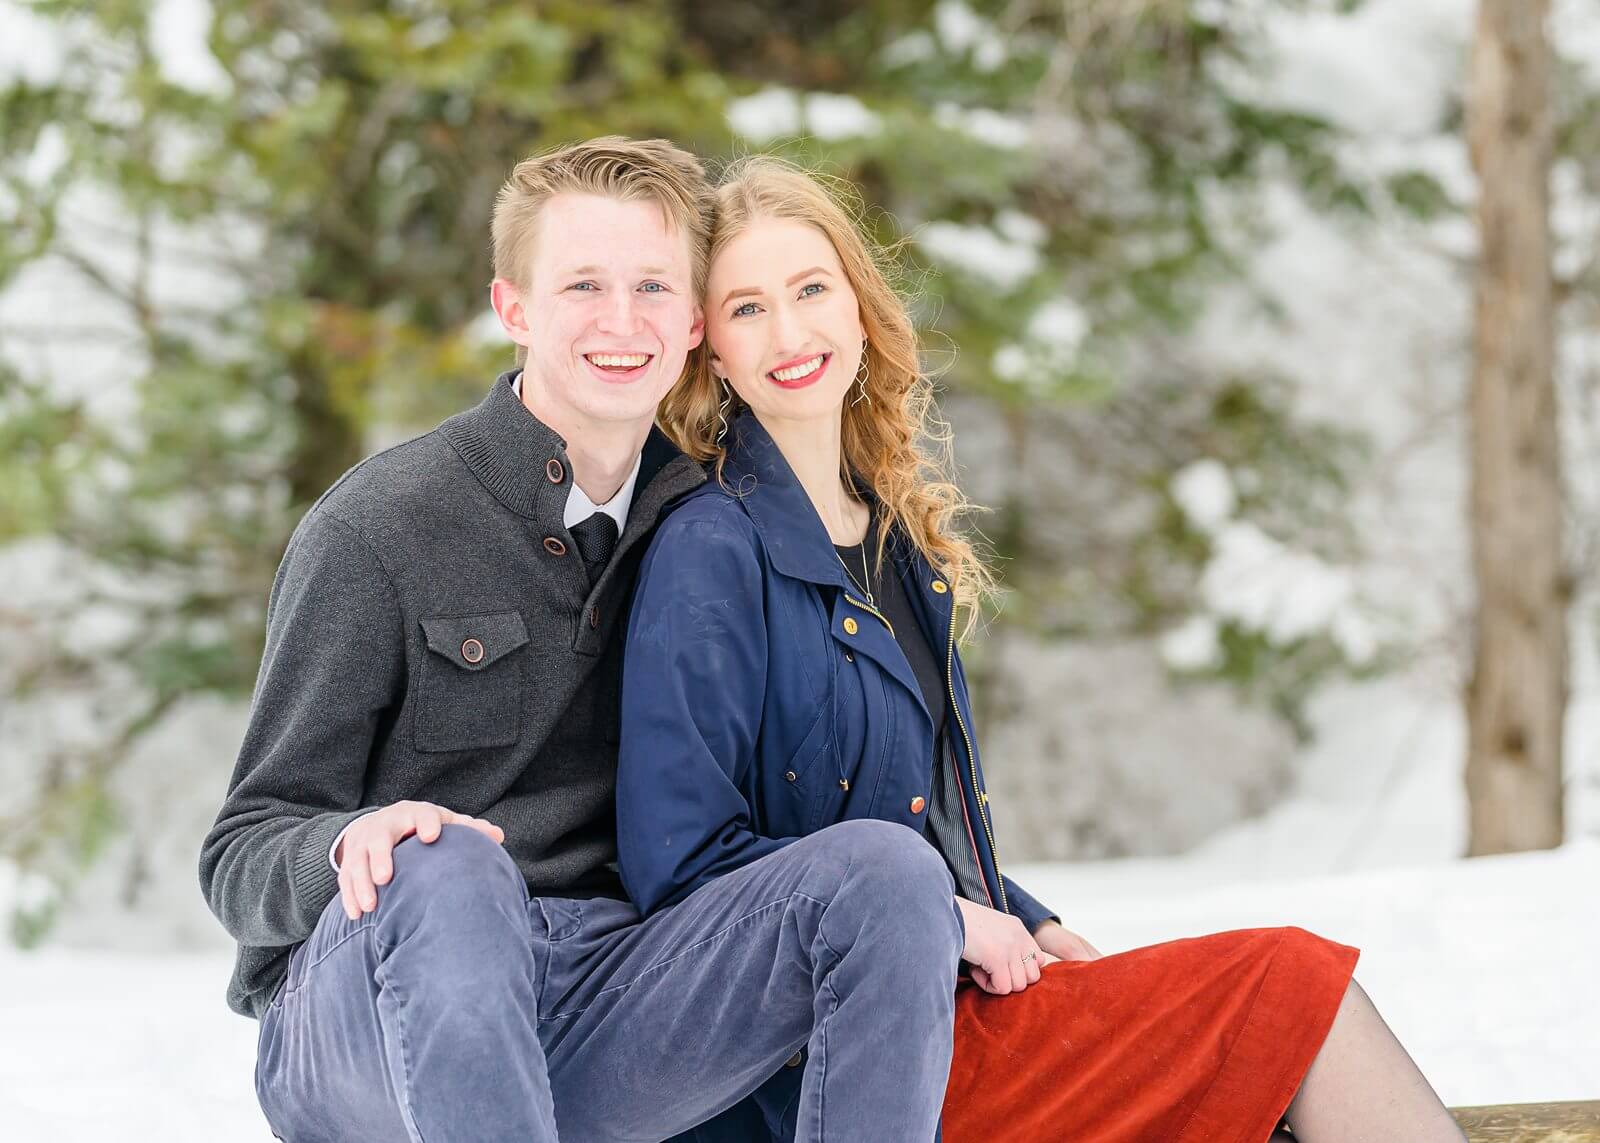 a man wearing a dark gray pullover and woman wearing a navy blue jacket at Tibble Fork Reservoir sit next to each other on a fence show for their winter engagement photos